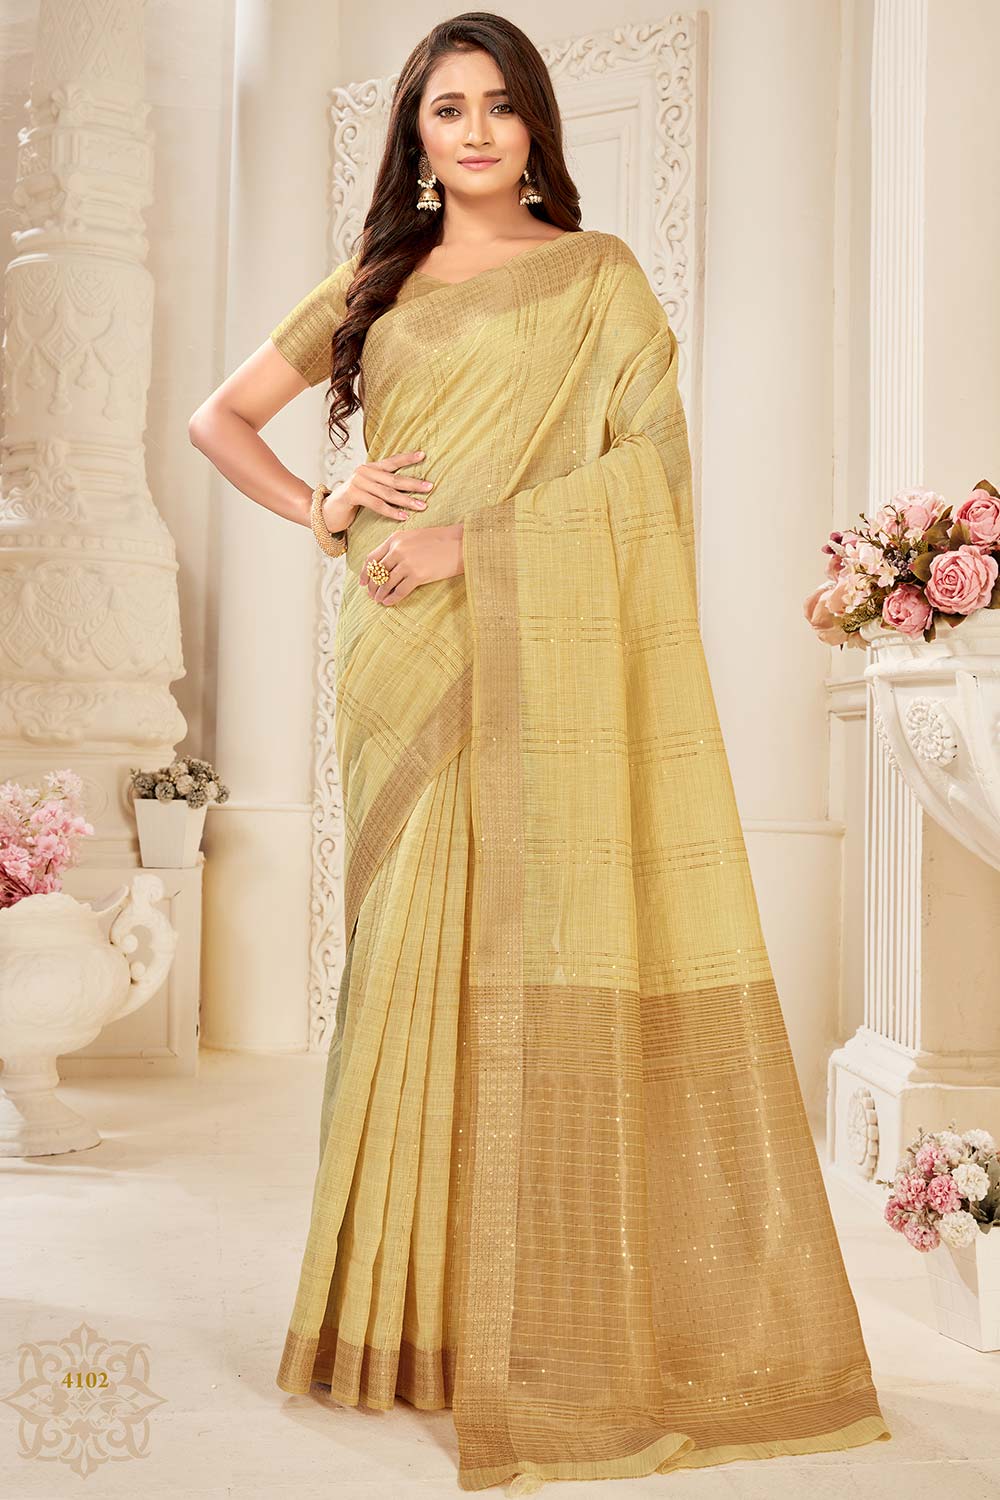 Buy Blended Cotton Woven Saree in Beige Online